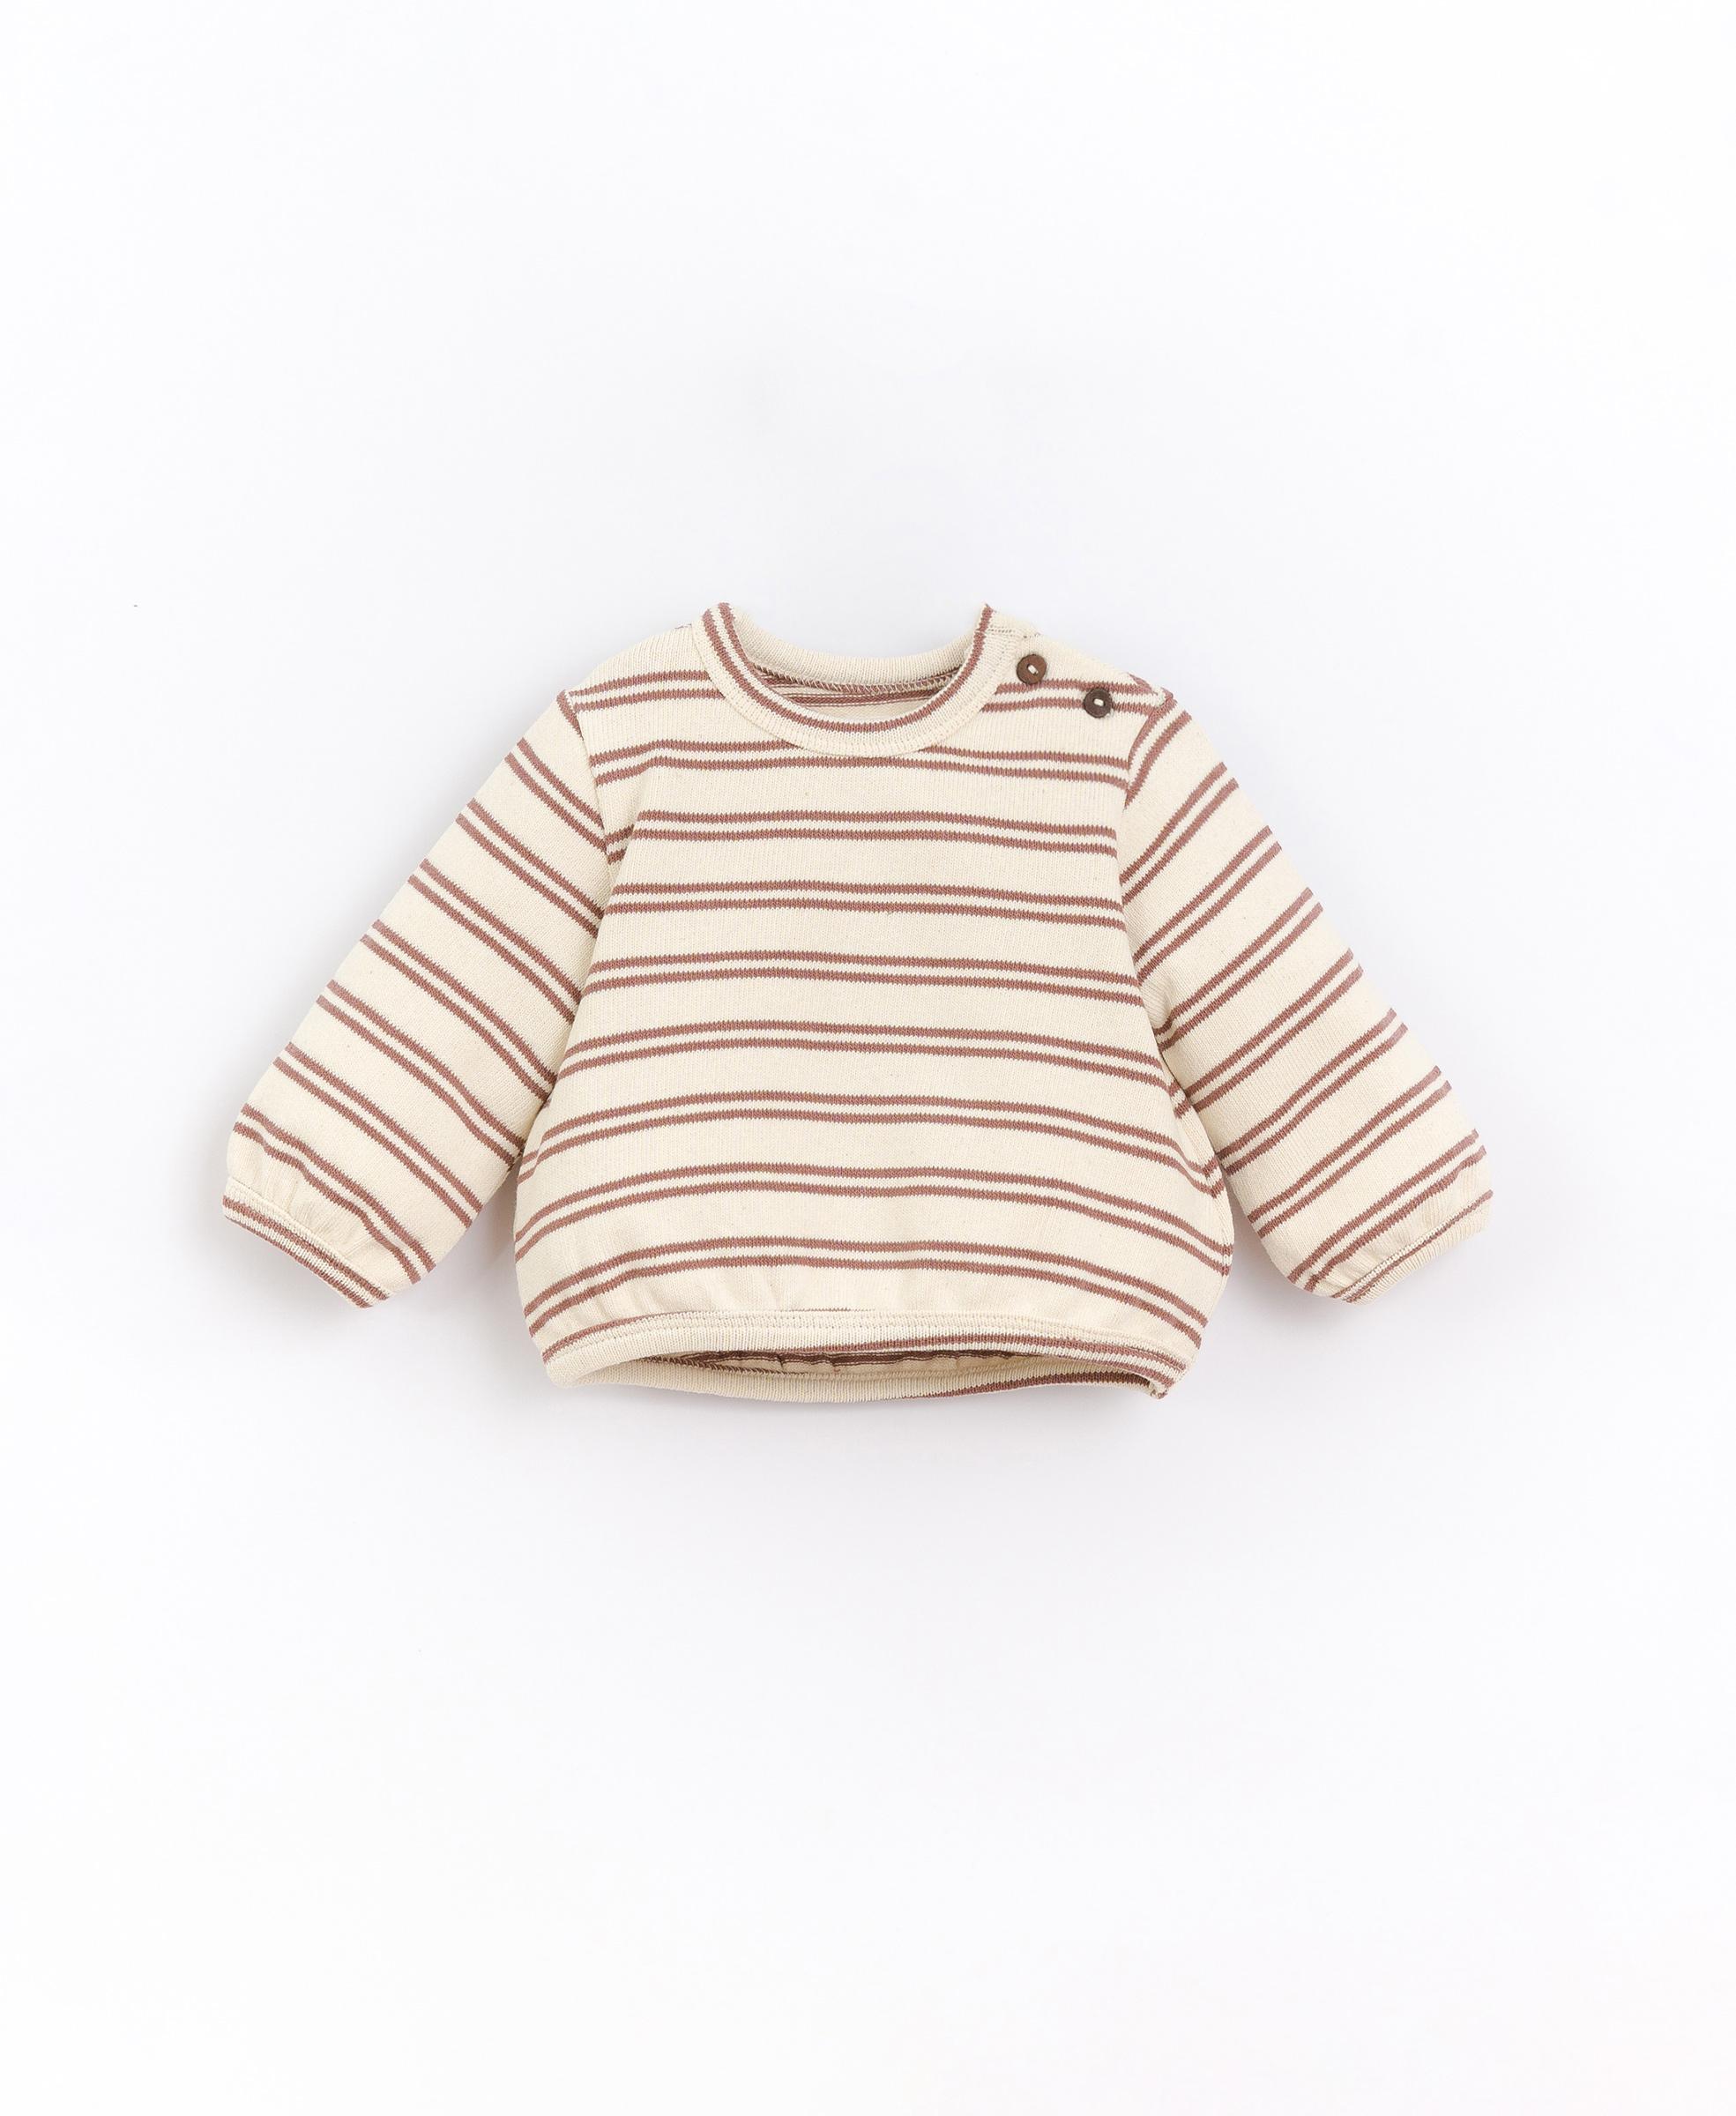 Sweatshirt in jersey blend of organic cotton and recycled cotton